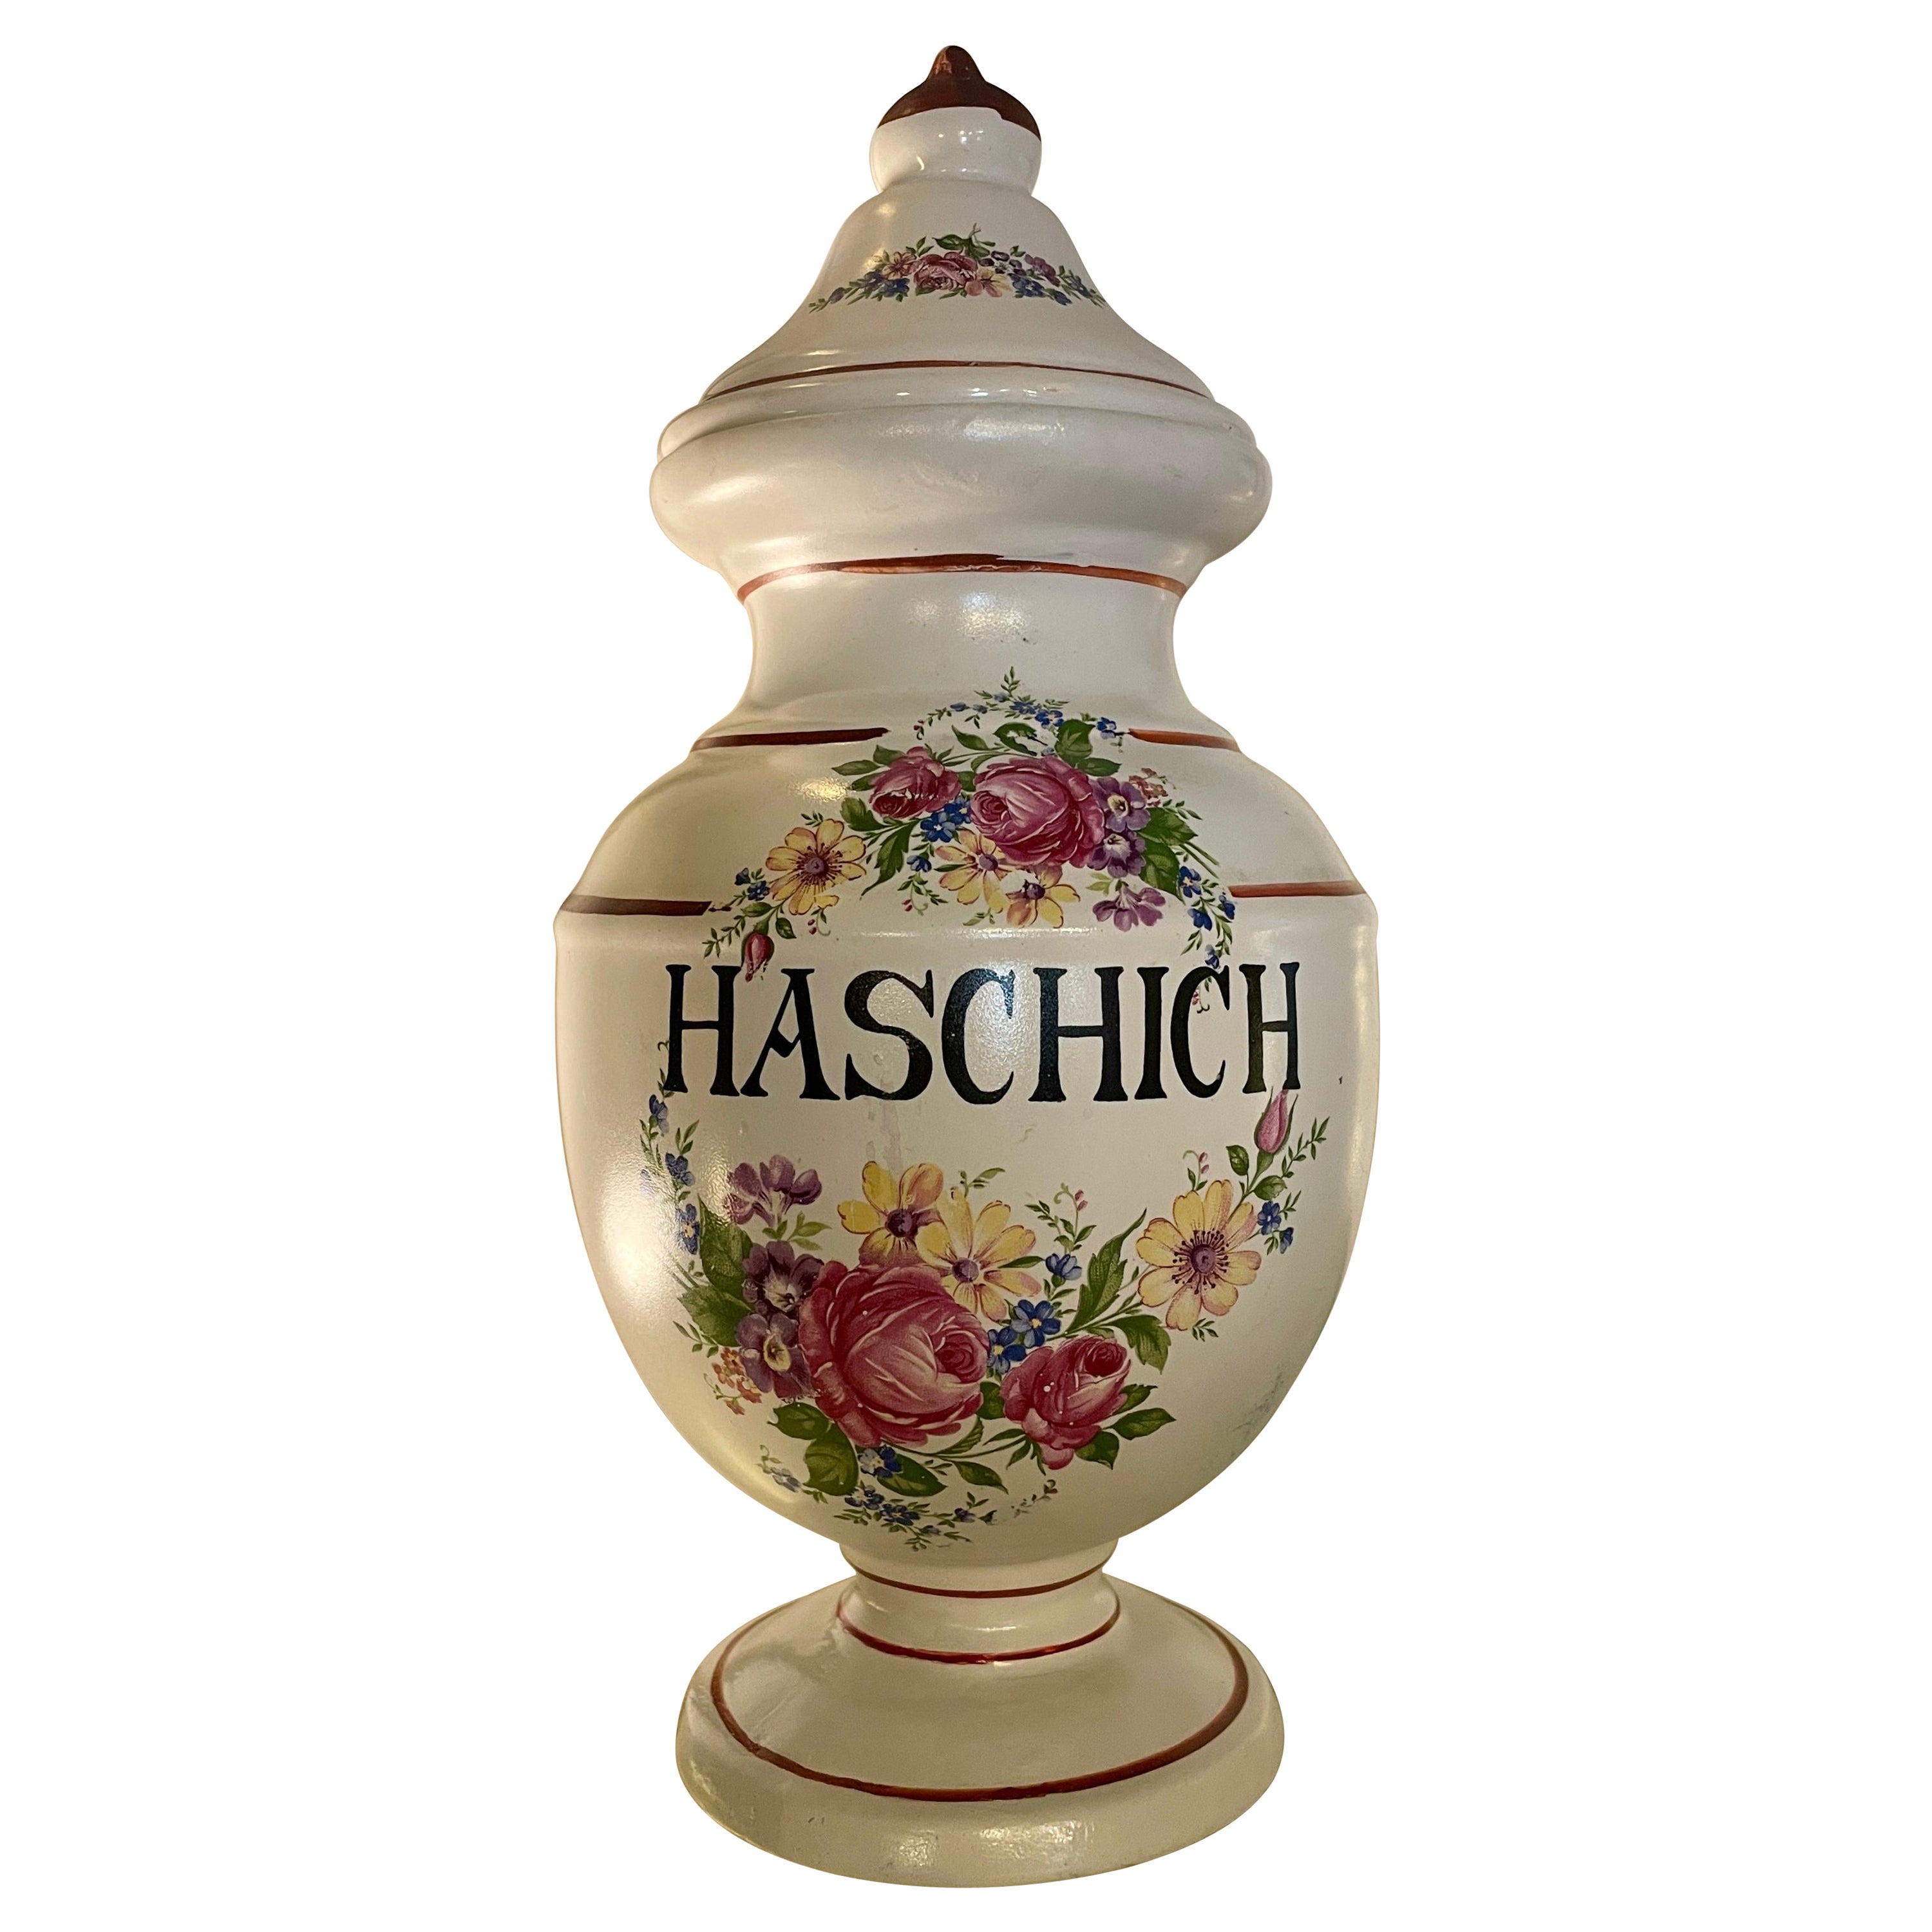 Big French Apothecary Jar Haschich Opium 19th Porcelain Limoges Drug Cocain Tall